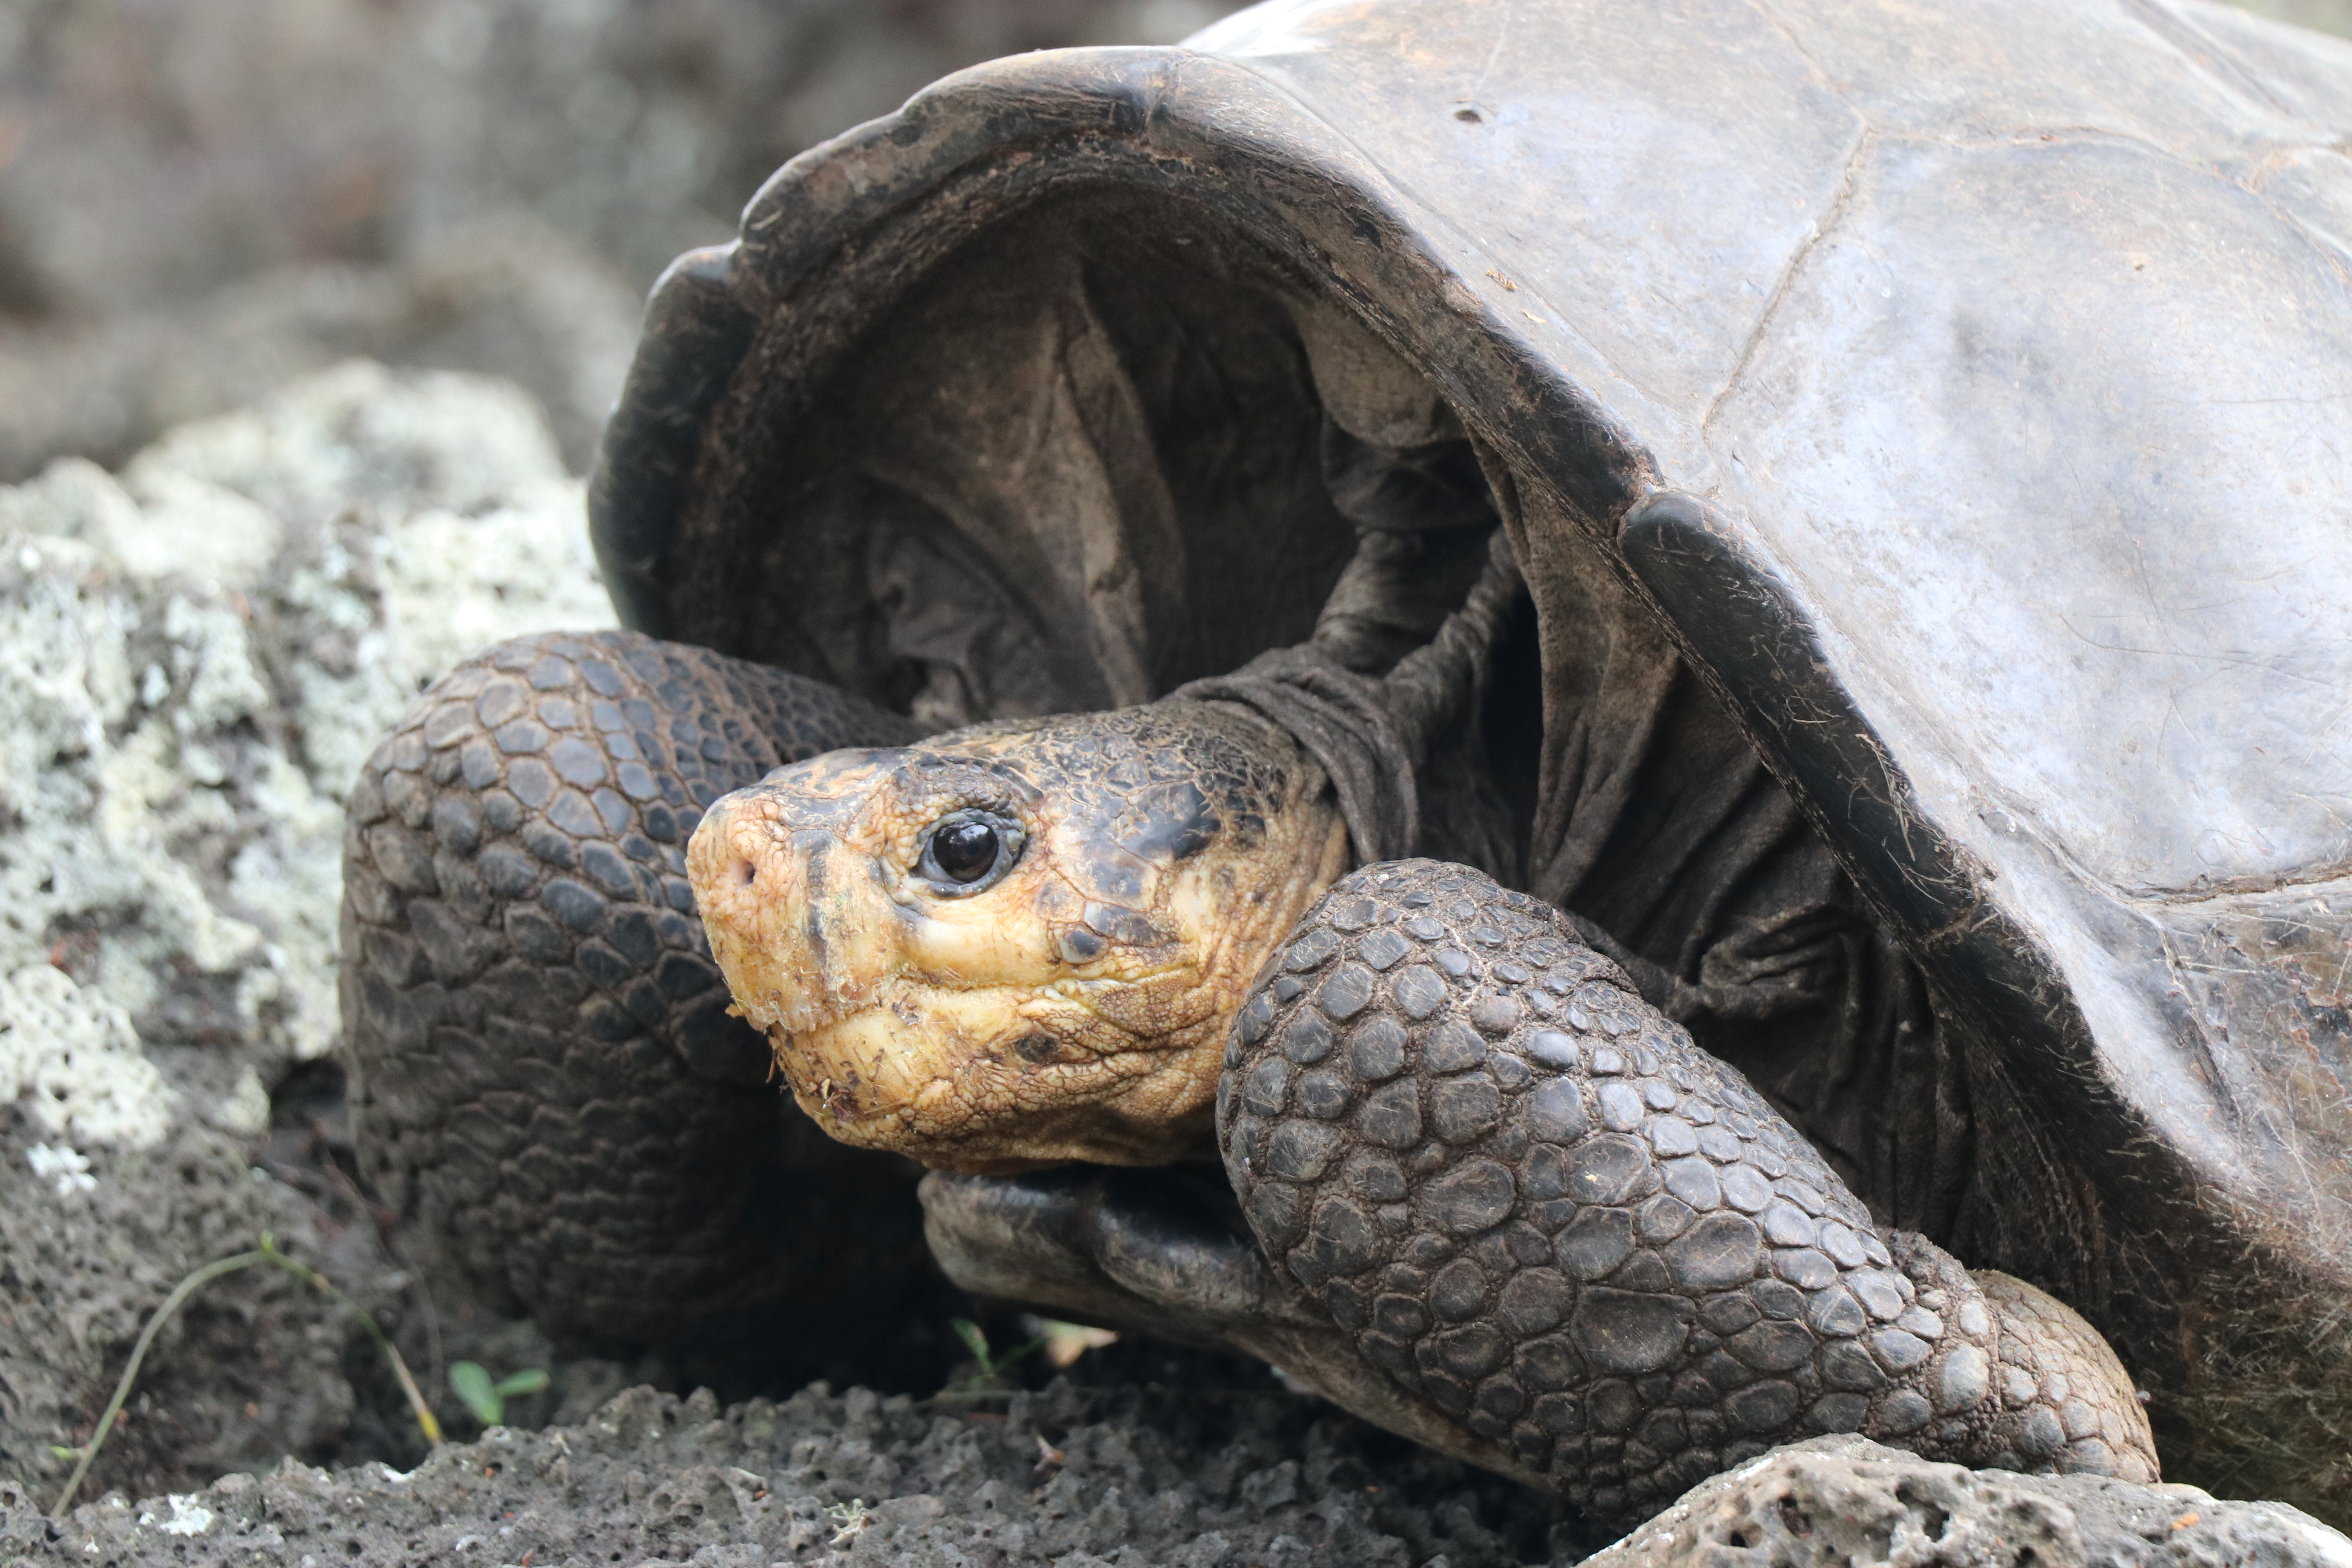 A tortoise considered extinct 100 years ago in Galapagos is still in existence, in Santa Cruz